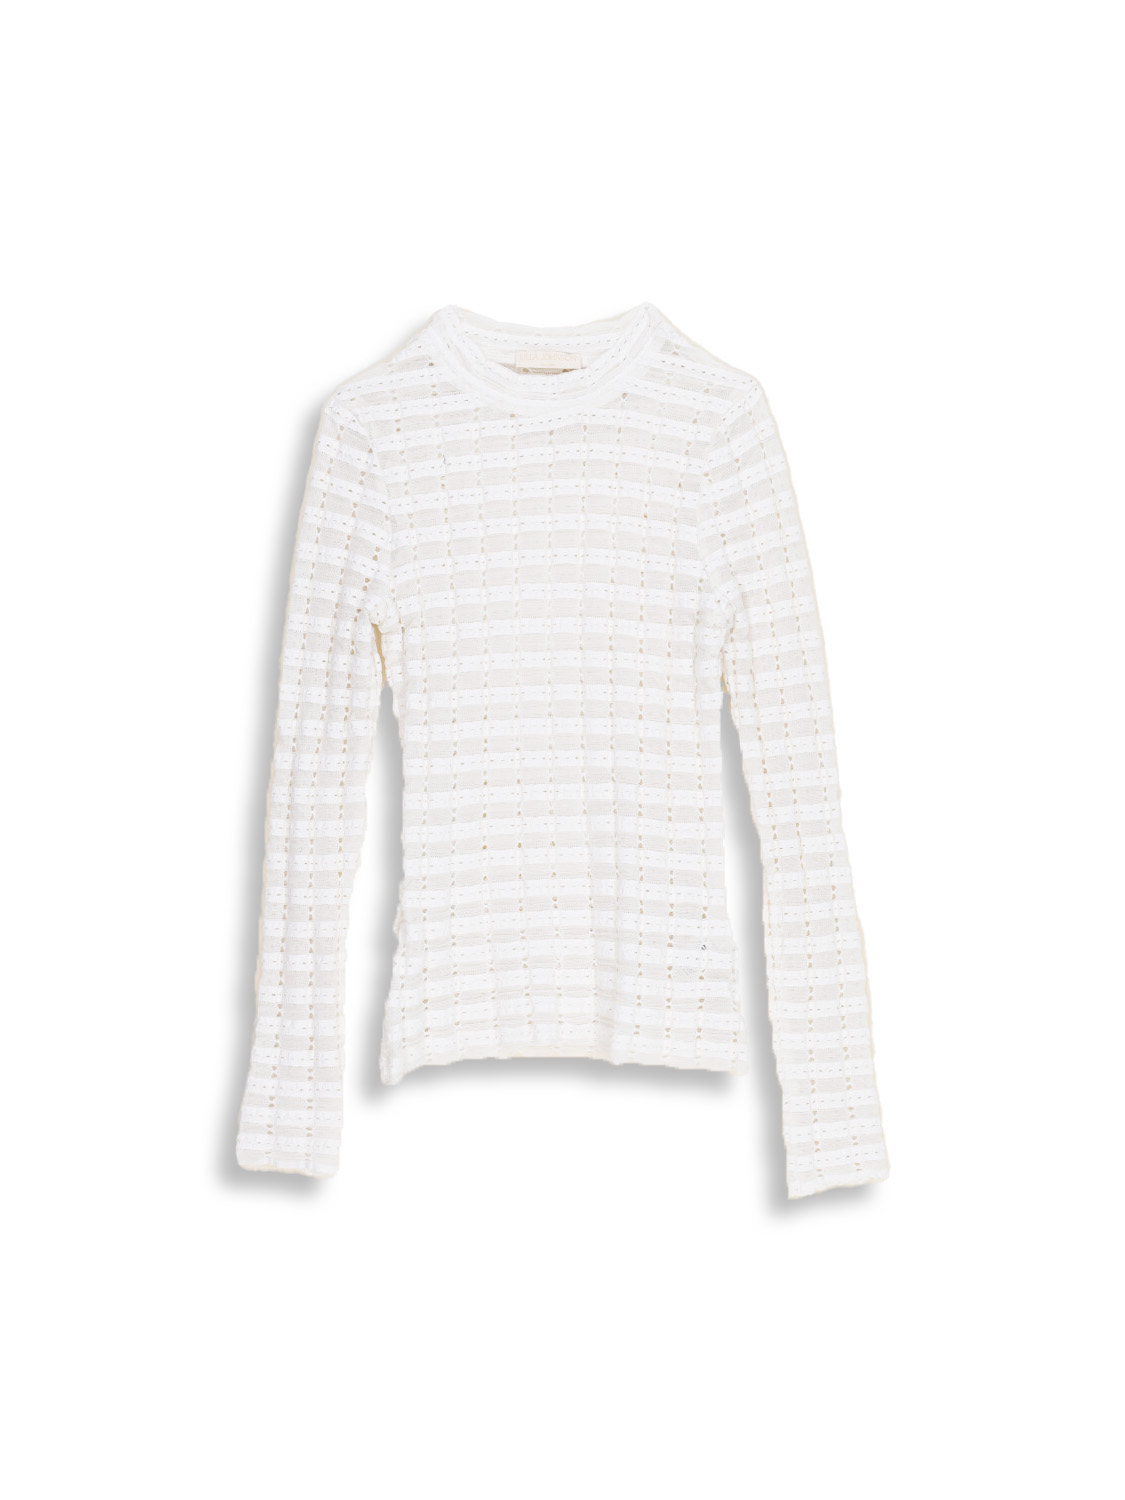 Emma Top - cotton long sleeve shirt with hole details